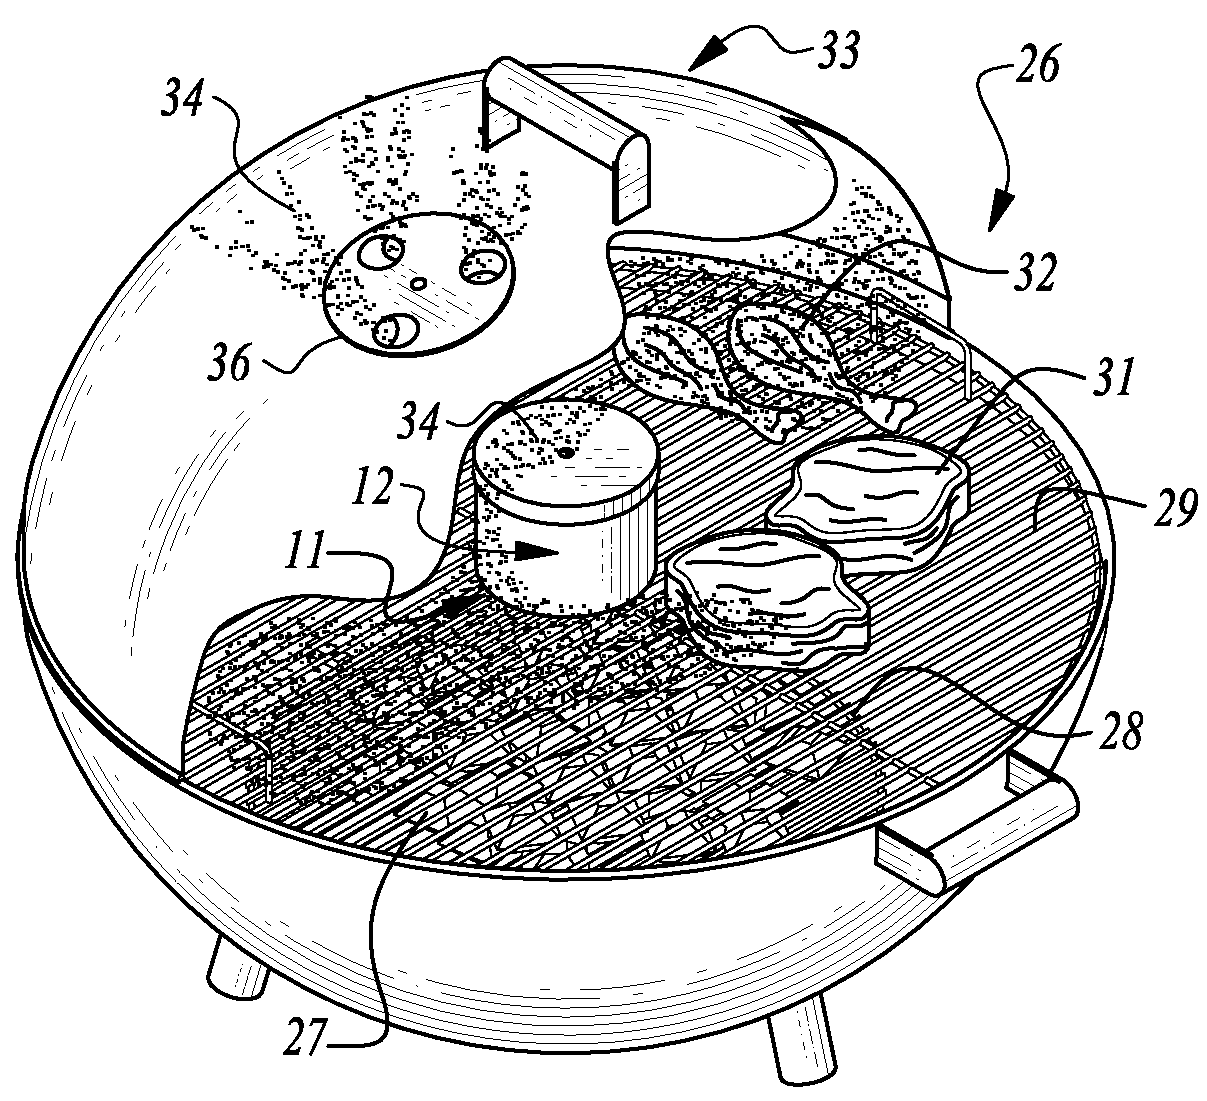 Apparatus and method to impart smoke flavoring to barbequed meat